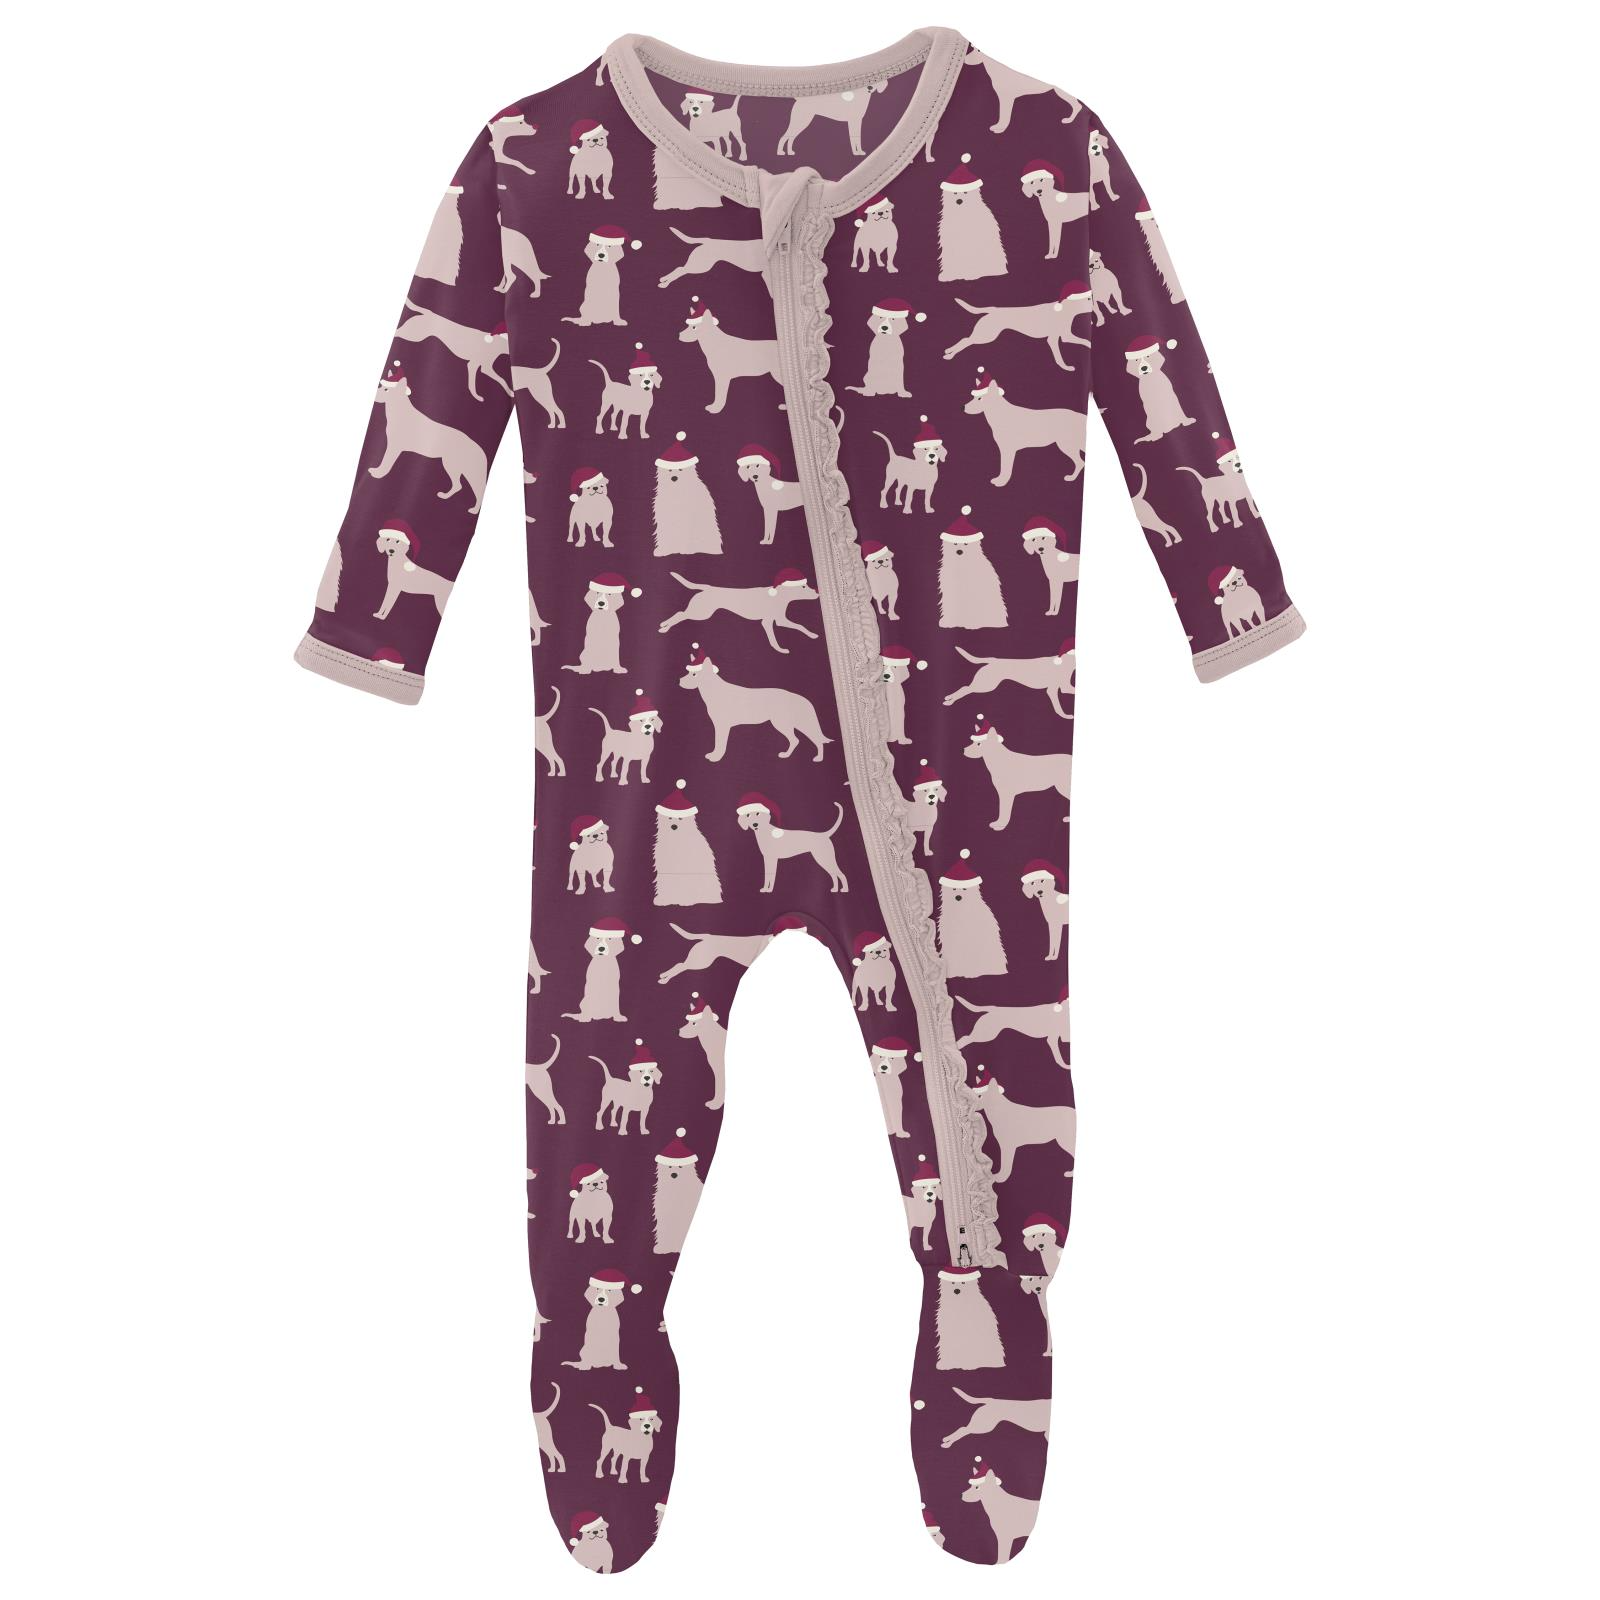 Kickee Pants Natural Farm Animals Infant Ruffle Footie 6-9 Months